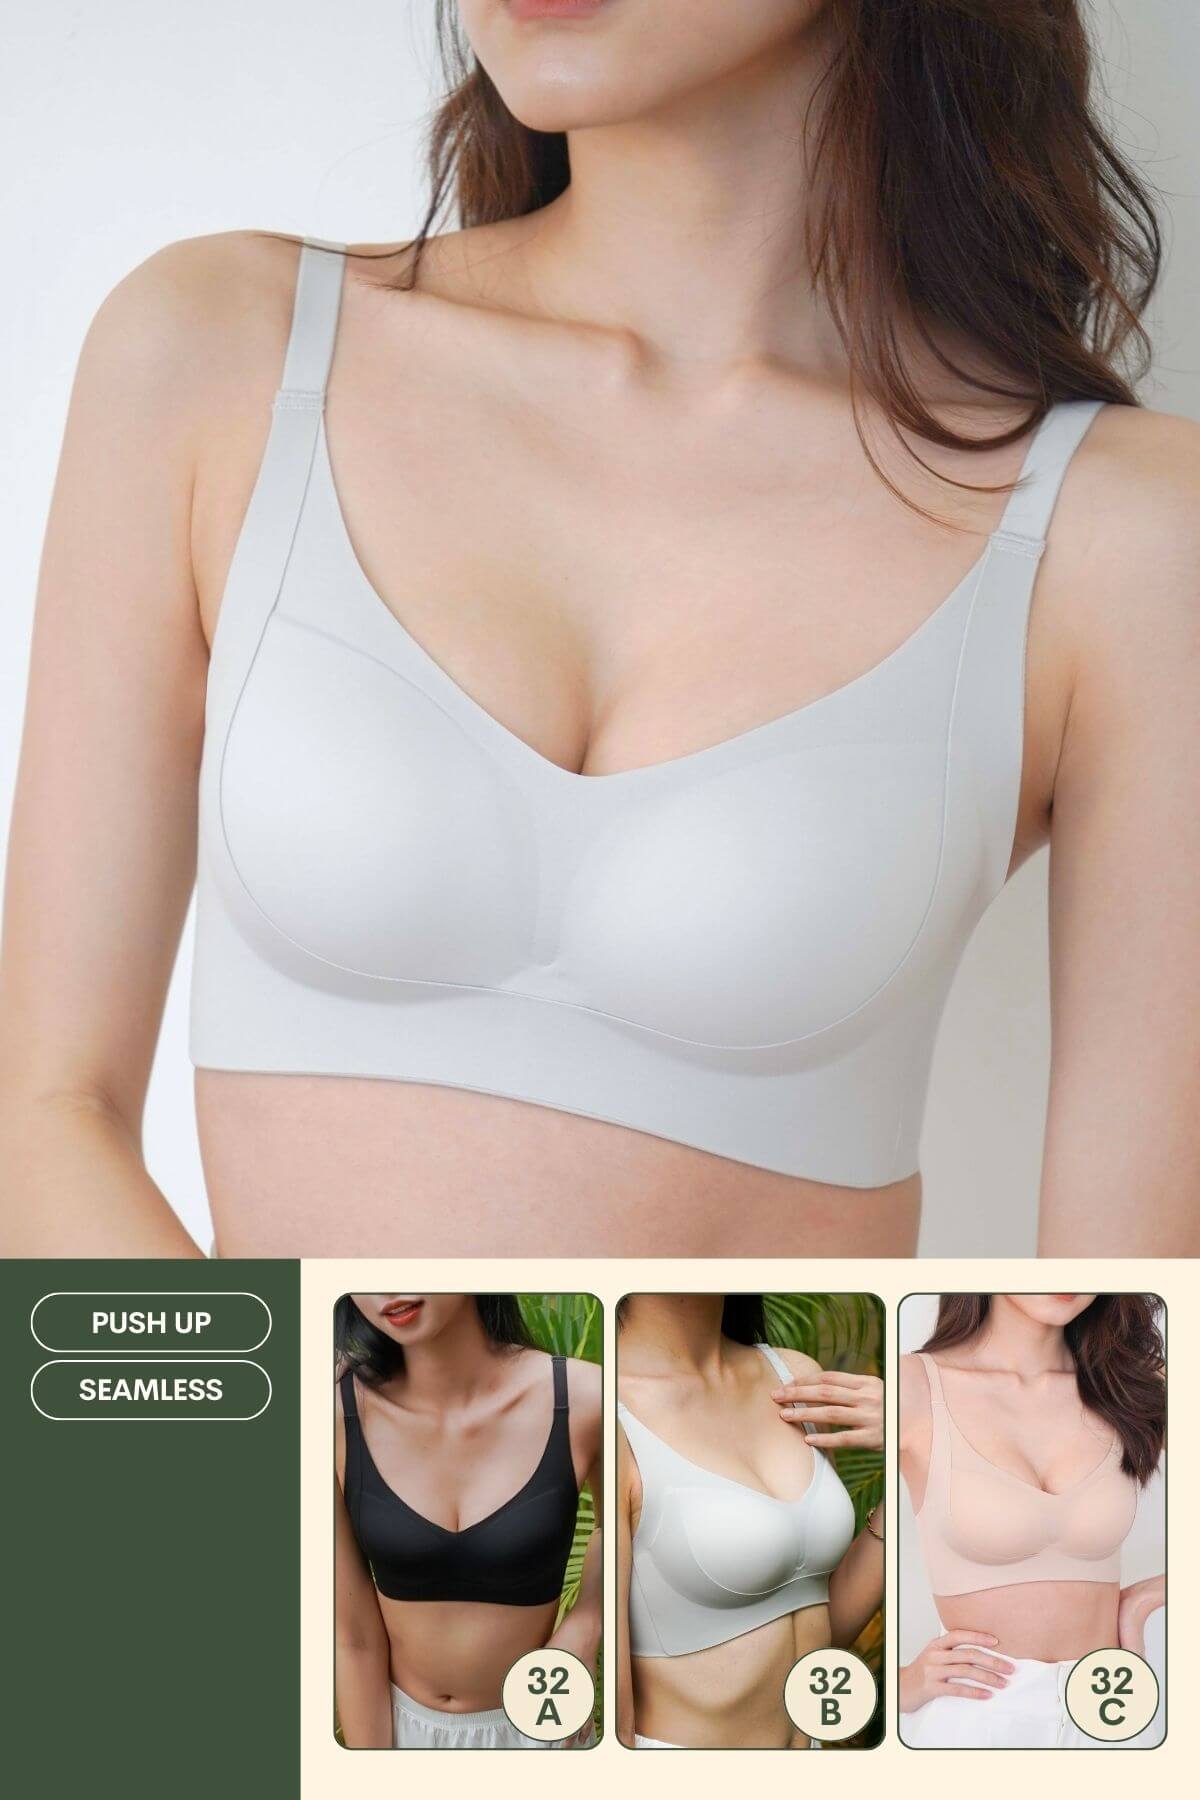 [Top Pick] Routine Curvy Seamless Push Up Bra In LightGrey - Adelais Official - Bra - Coverage & Push Up & Seamless